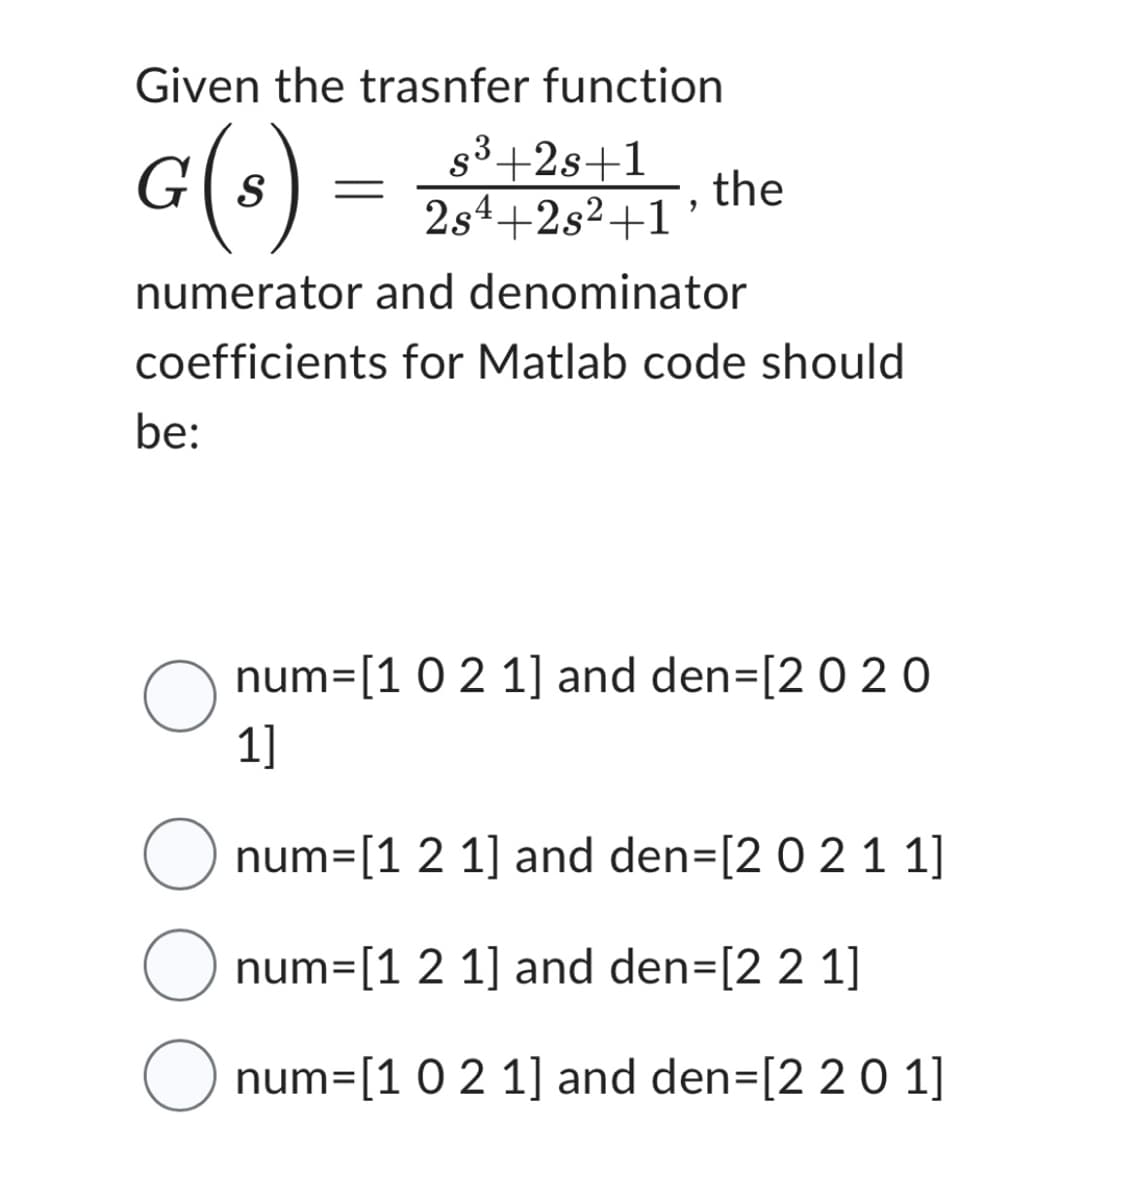 Given the trasnfer function
G(s)
numerator and denominator
coefficients for Matlab code should
be:
O
s³+2s+1
2s4+2s²+1'
the
num= [1 0 2 1] and den=[2 020
1]
O num=[1 2 1] and den=[2 0 2 1 1]
O
num=[1 2 1] and den=[2 2 1]
O num=[1 0 2 1] and den=[2 2 0 1]